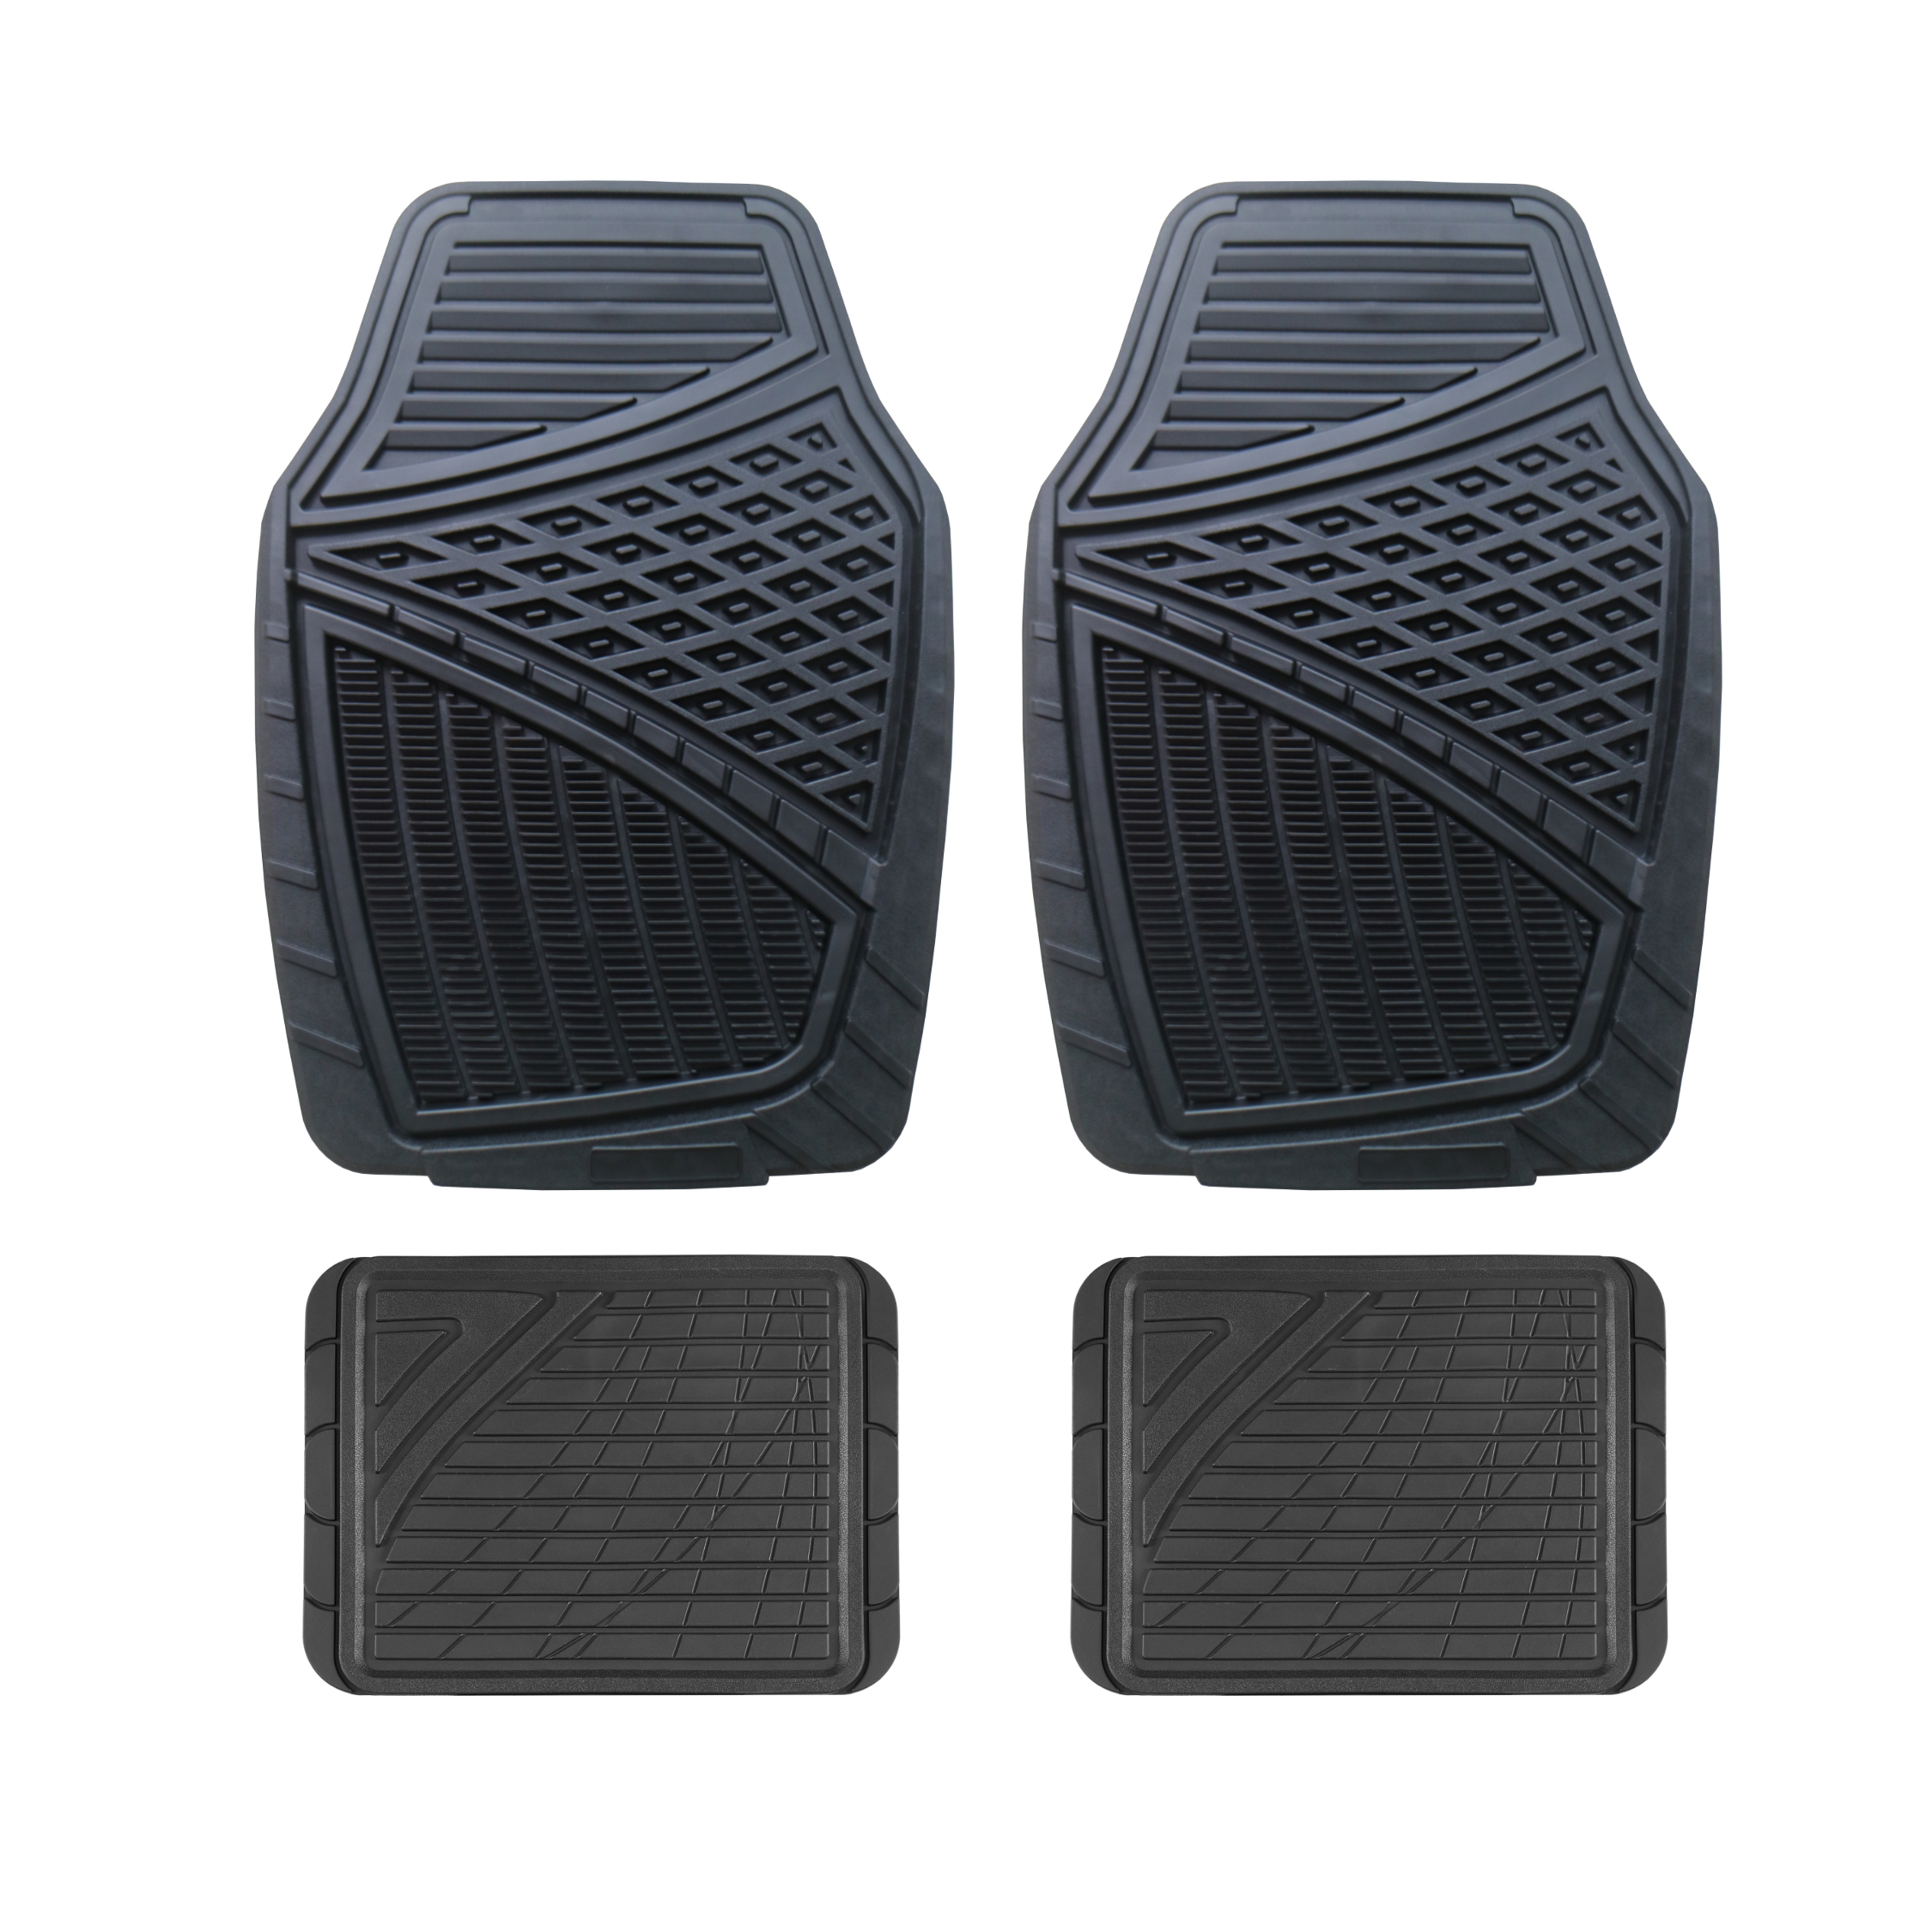 Premium Universal All Weather Car Floor Mats, 4 pcs, Trim to Fit Design Full Coverage Odorless Rubber Floor Mat, Liners-Deep Dish Heavy Duty Rubber Floor Mats to fit Cars, SUV #6104